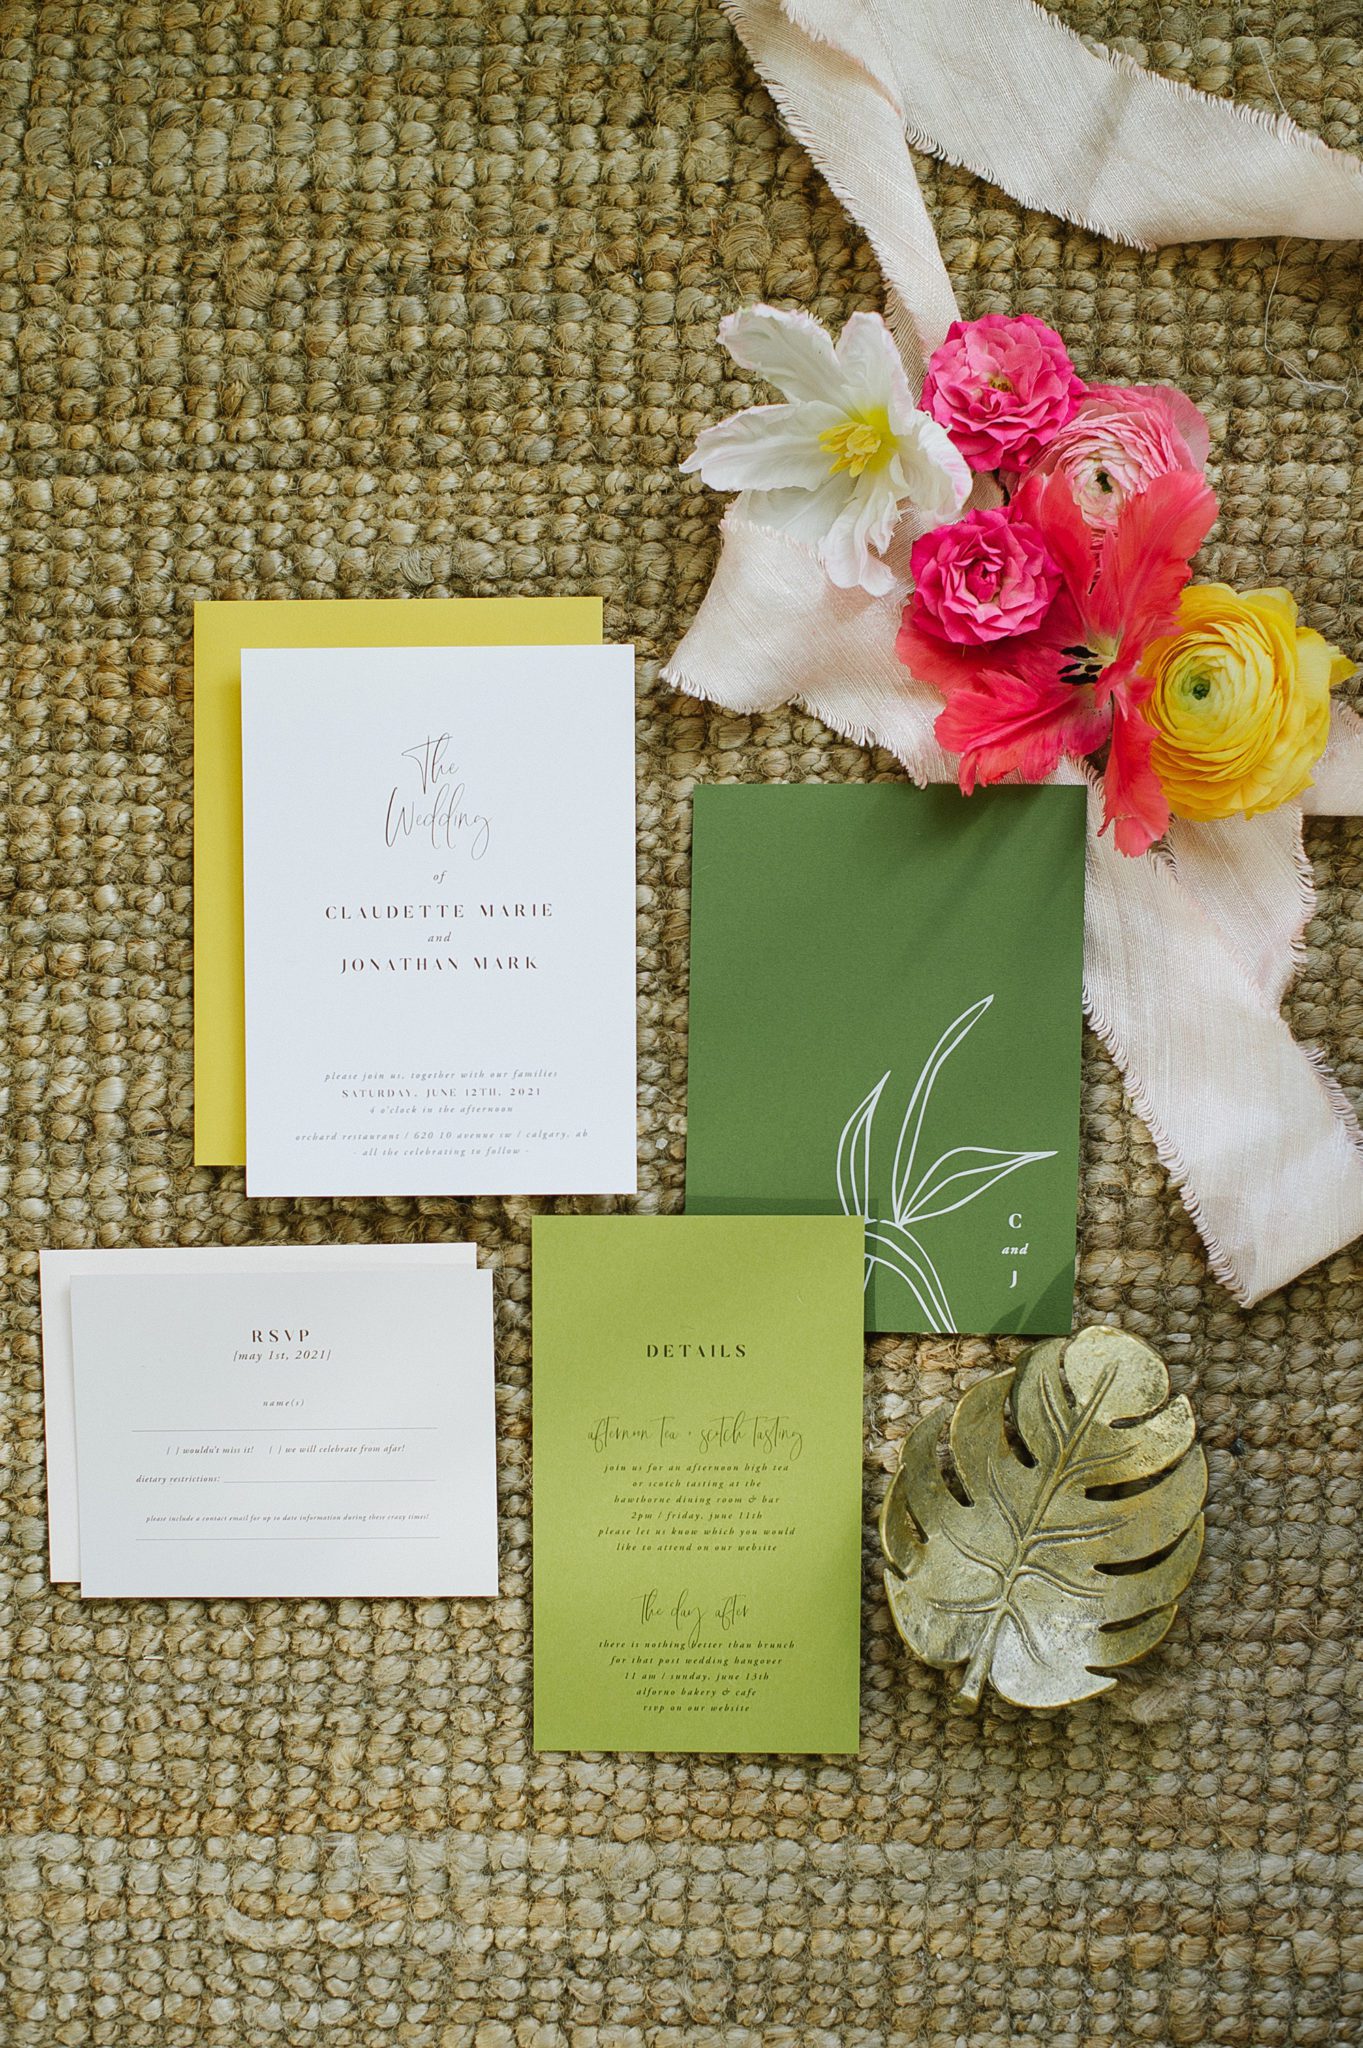 Wedding details for a spring wedding with bright florals